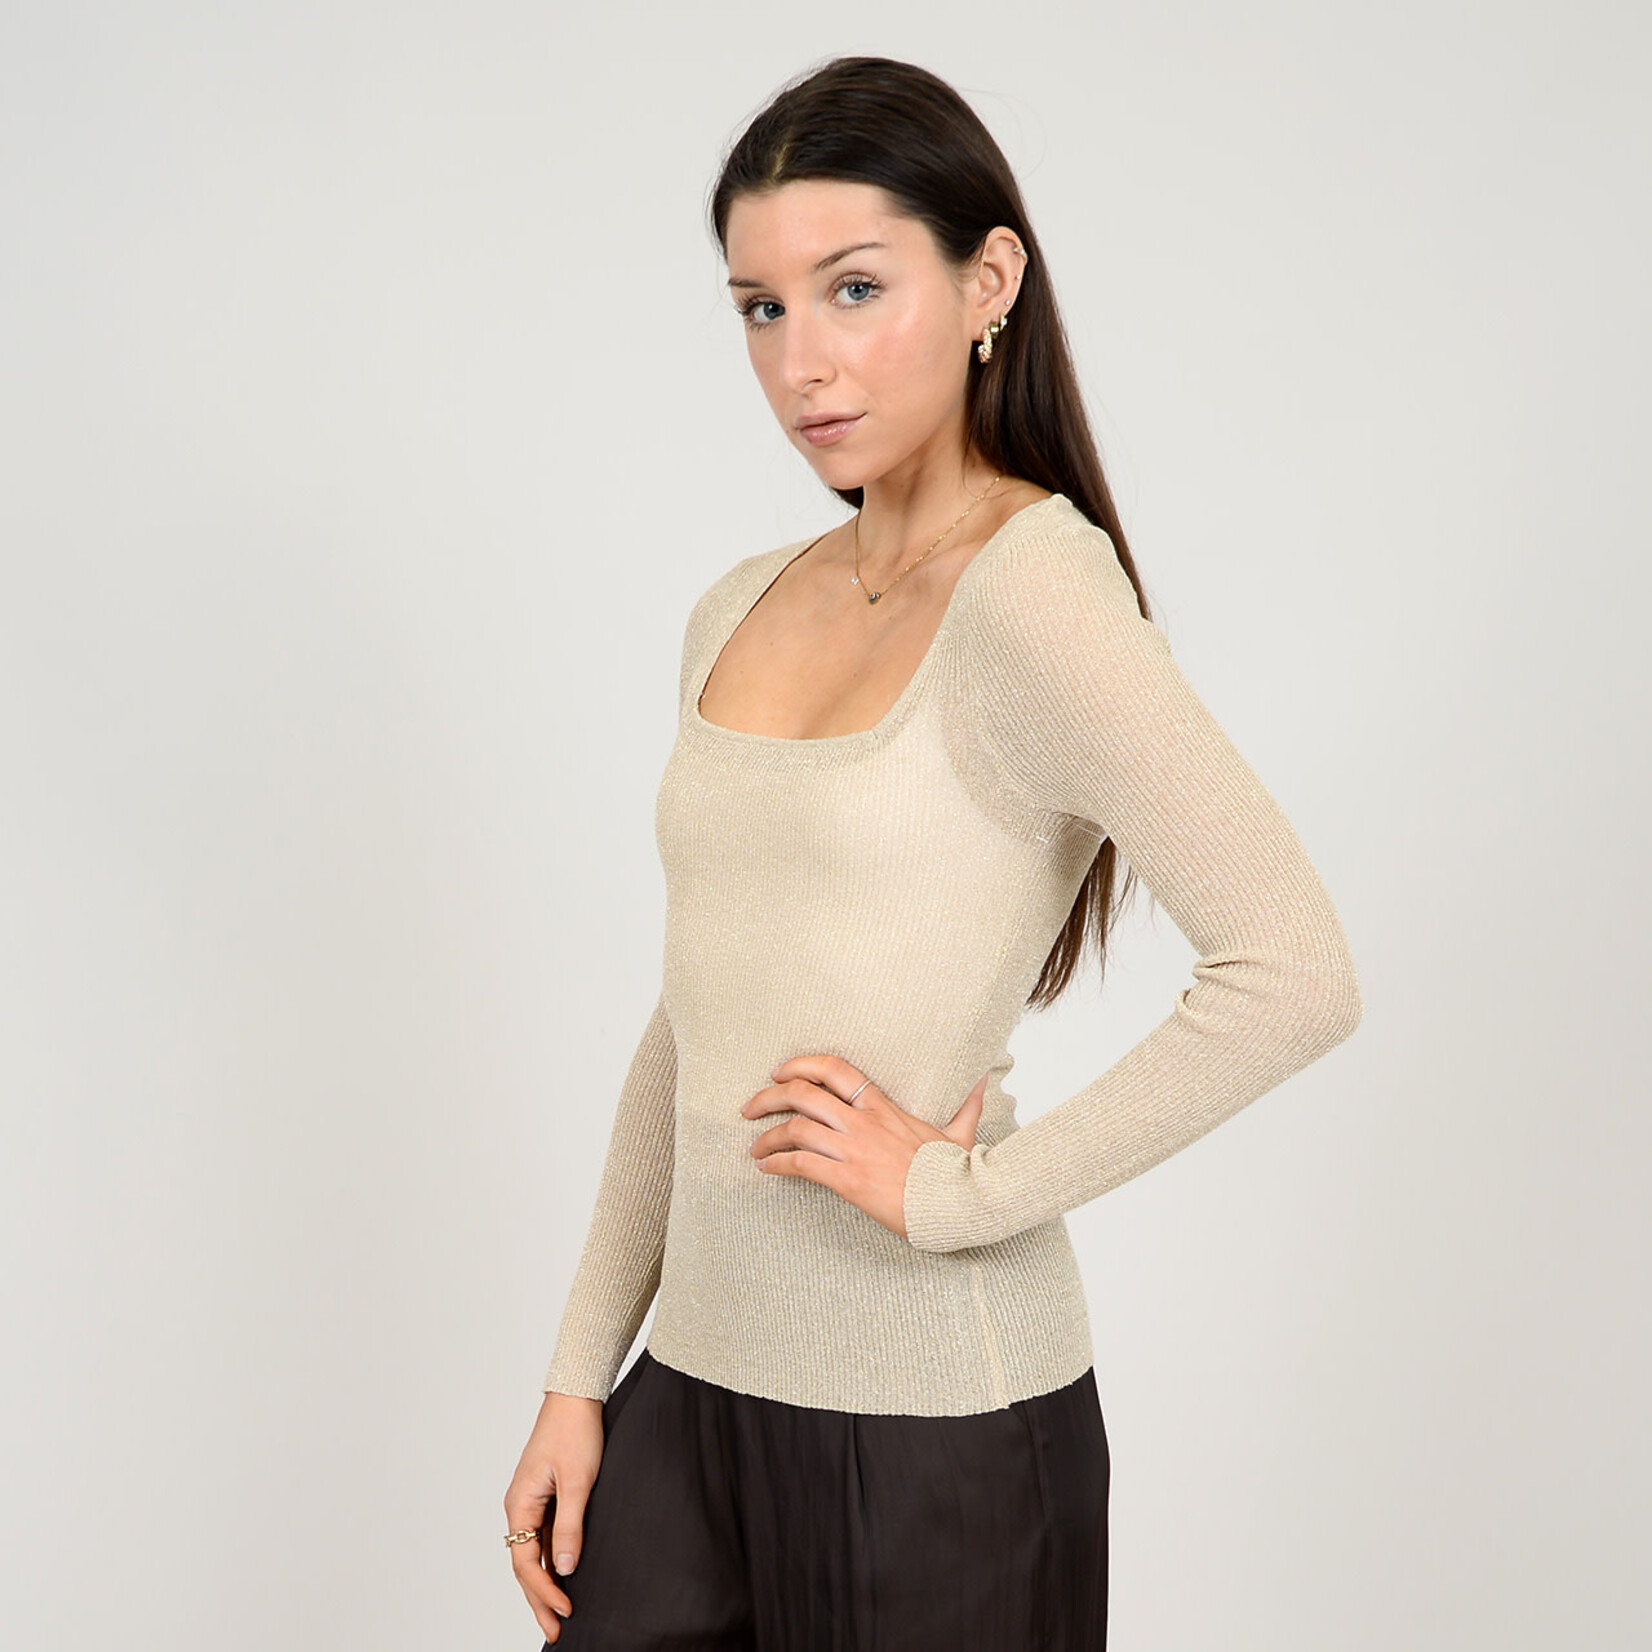 Rd Style Astra Square Neck Top